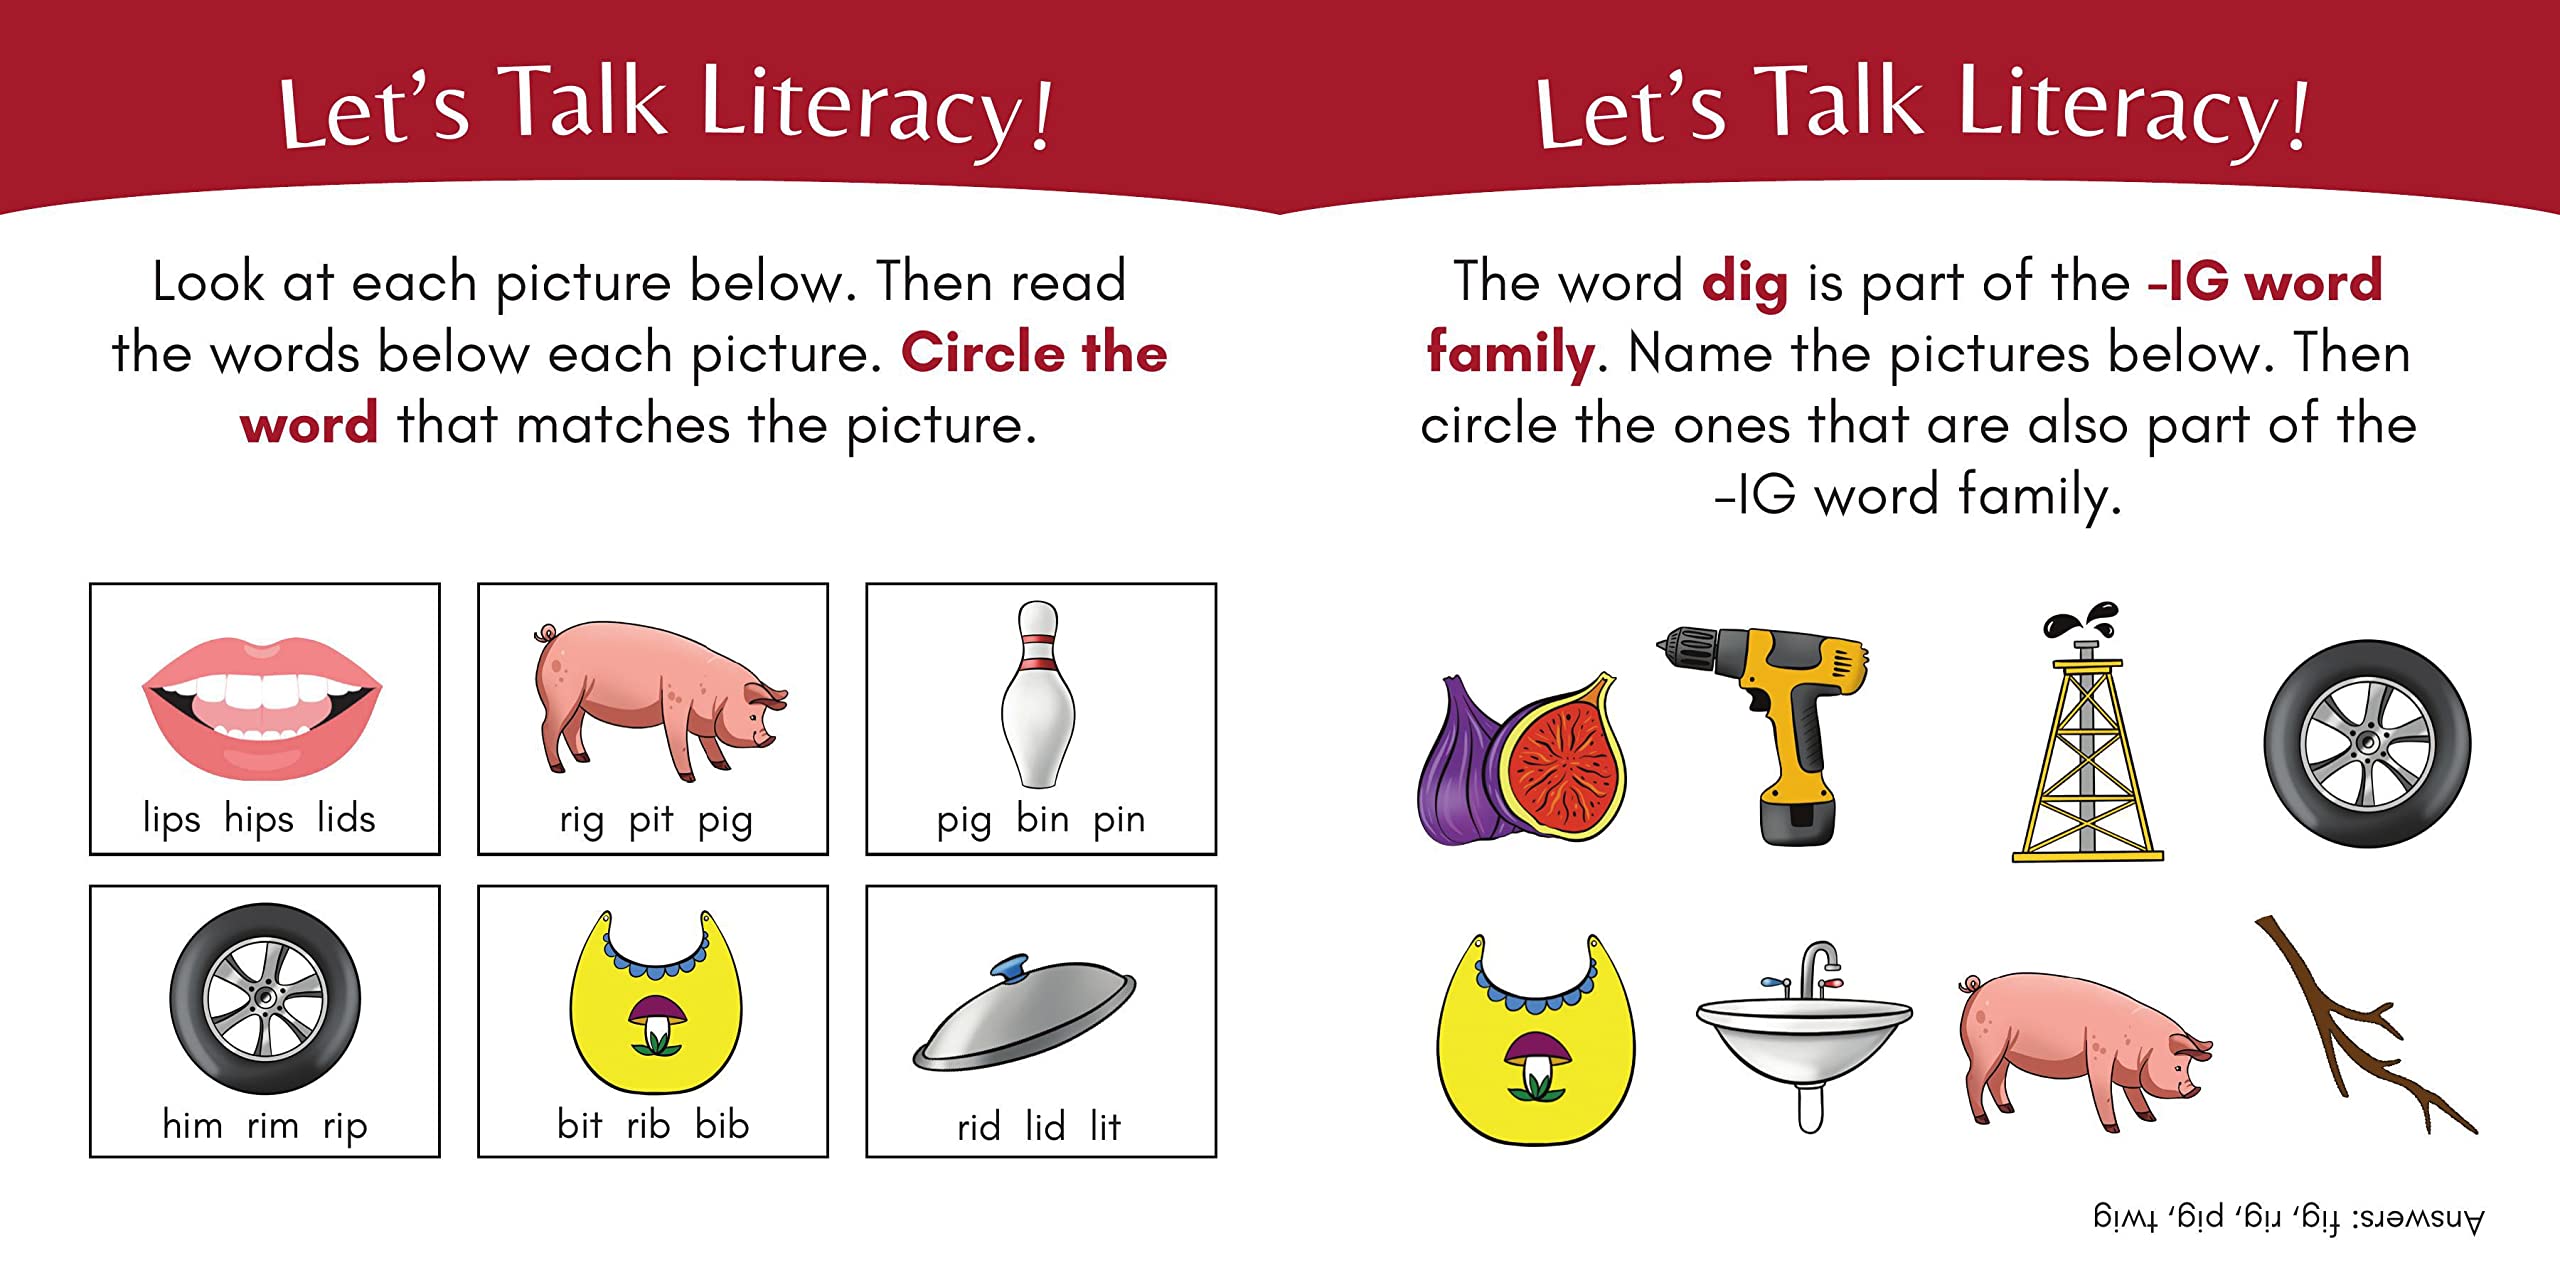 Charge into Reading Decodable Books (Stage 1): 5 Short Vowel Decodable Readers to Help Kindergarten and First Grade Beginning Readers Learn to Read (One Short Vowel Sound Per Book)